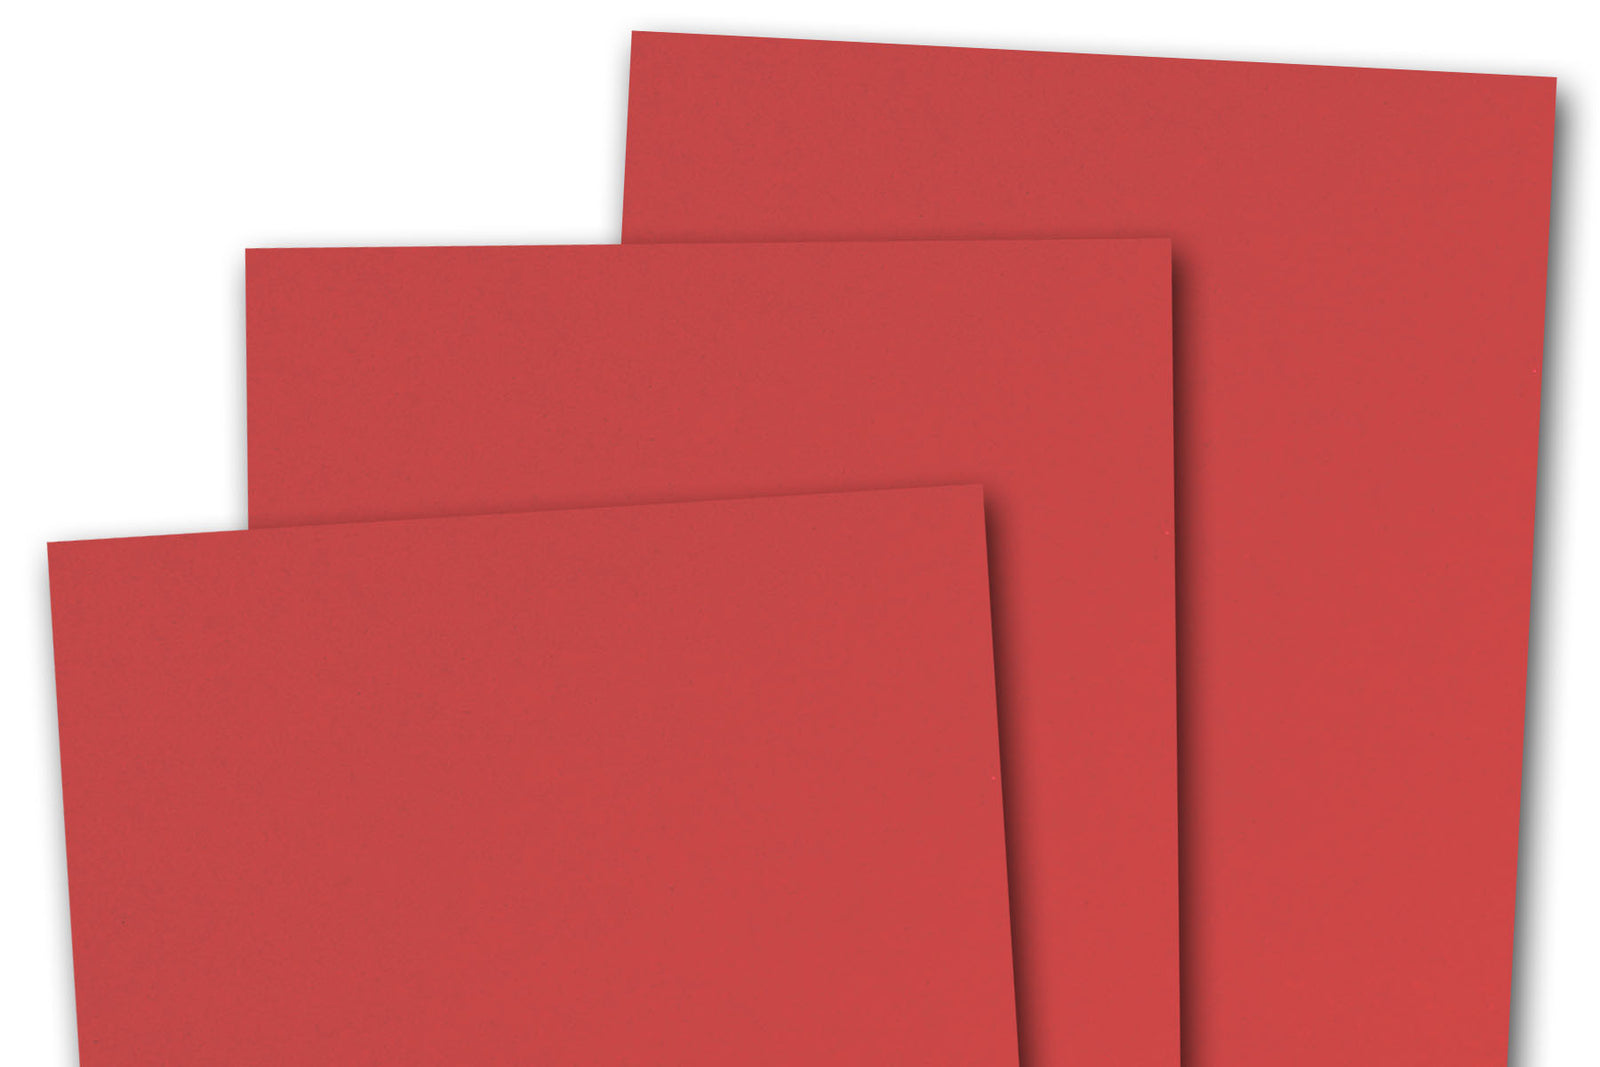 Astrobright Re-Entry Red 100 lb Card Stock 25 pack - OVERSTOCK